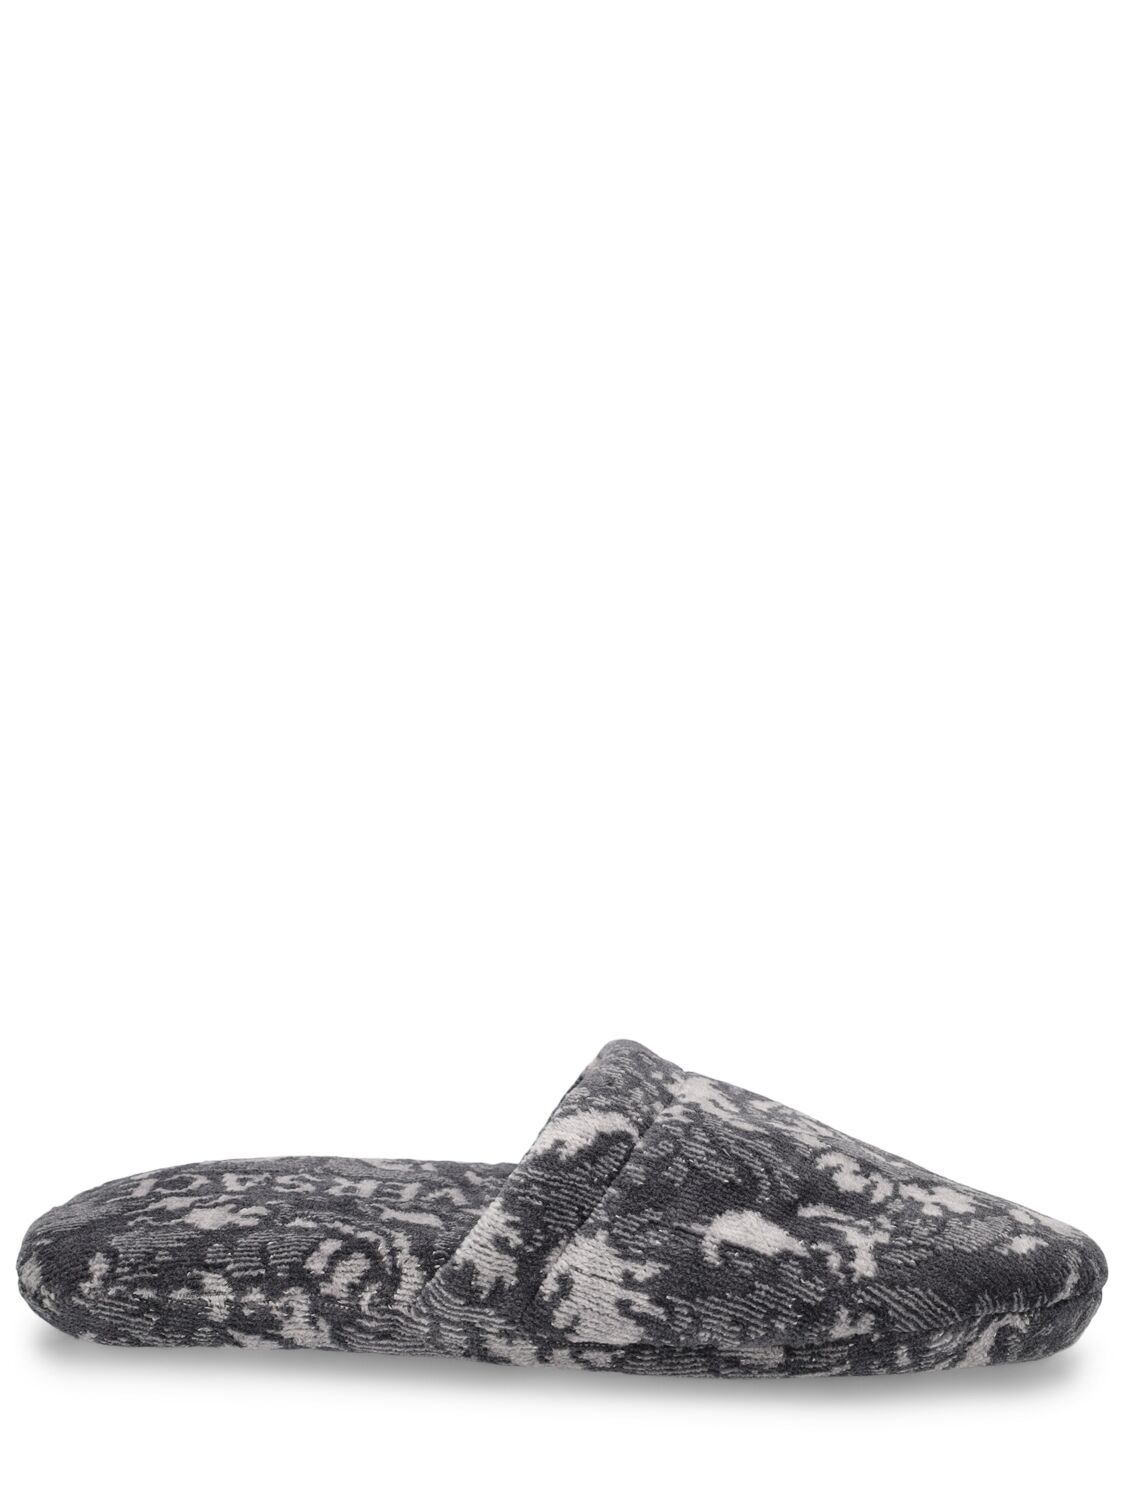 Versace Barocco Renaissance Bath Slippers In Anthracite